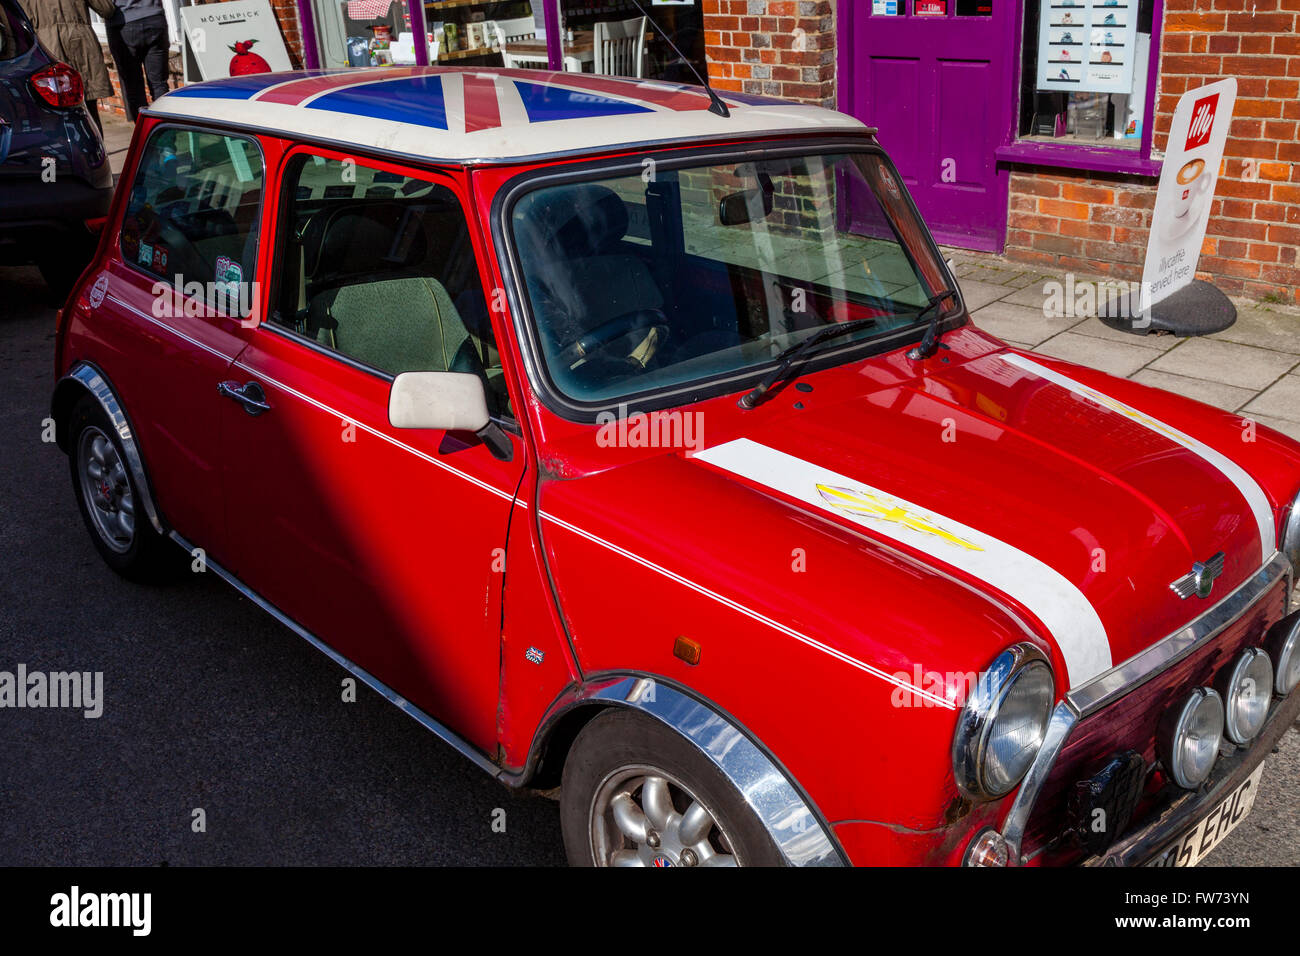 A Red Mini Cooper wth a Union Jack Roof by John Cooper version of